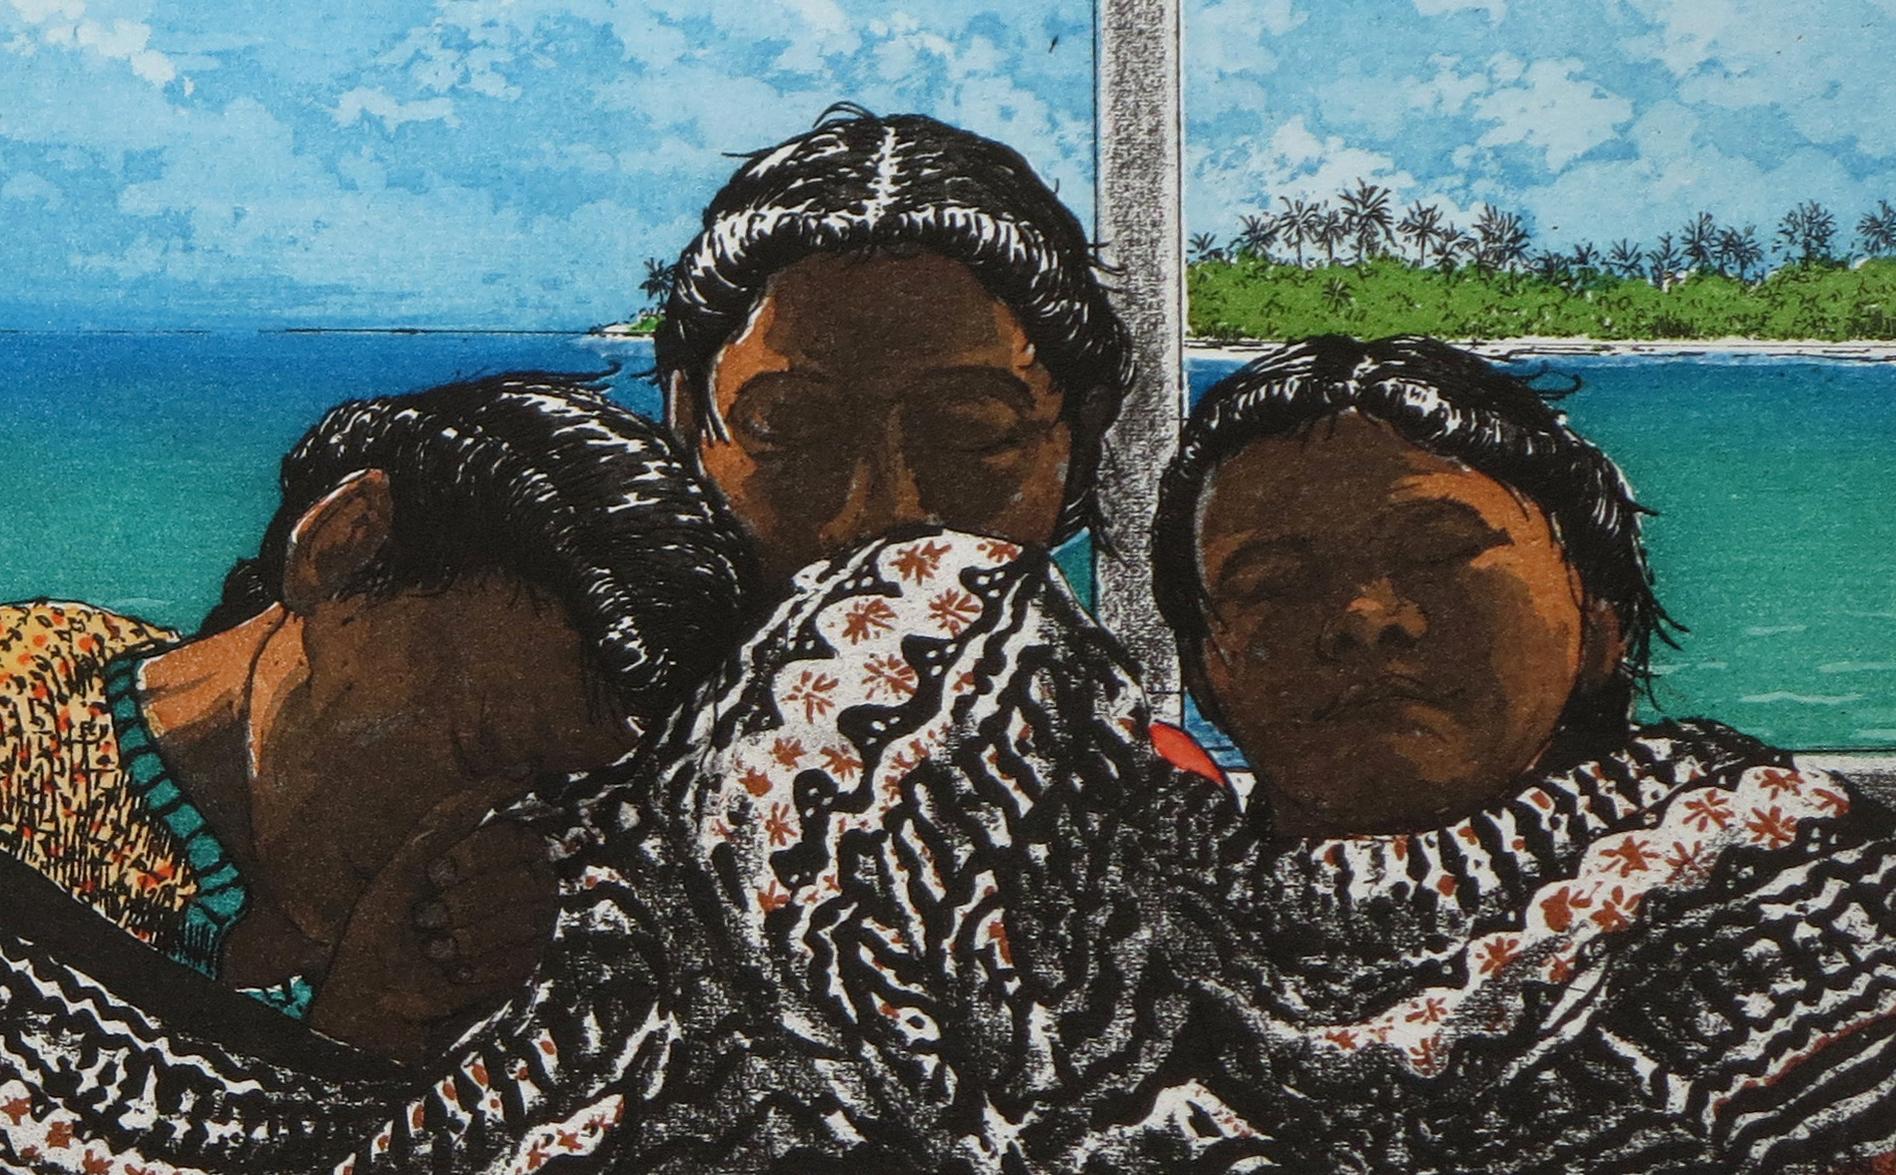 ''Aboard MV Onemato'' Color etching of Tonga women, Whale, Travel Etching - Blue Figurative Print by Rolf Weijburg